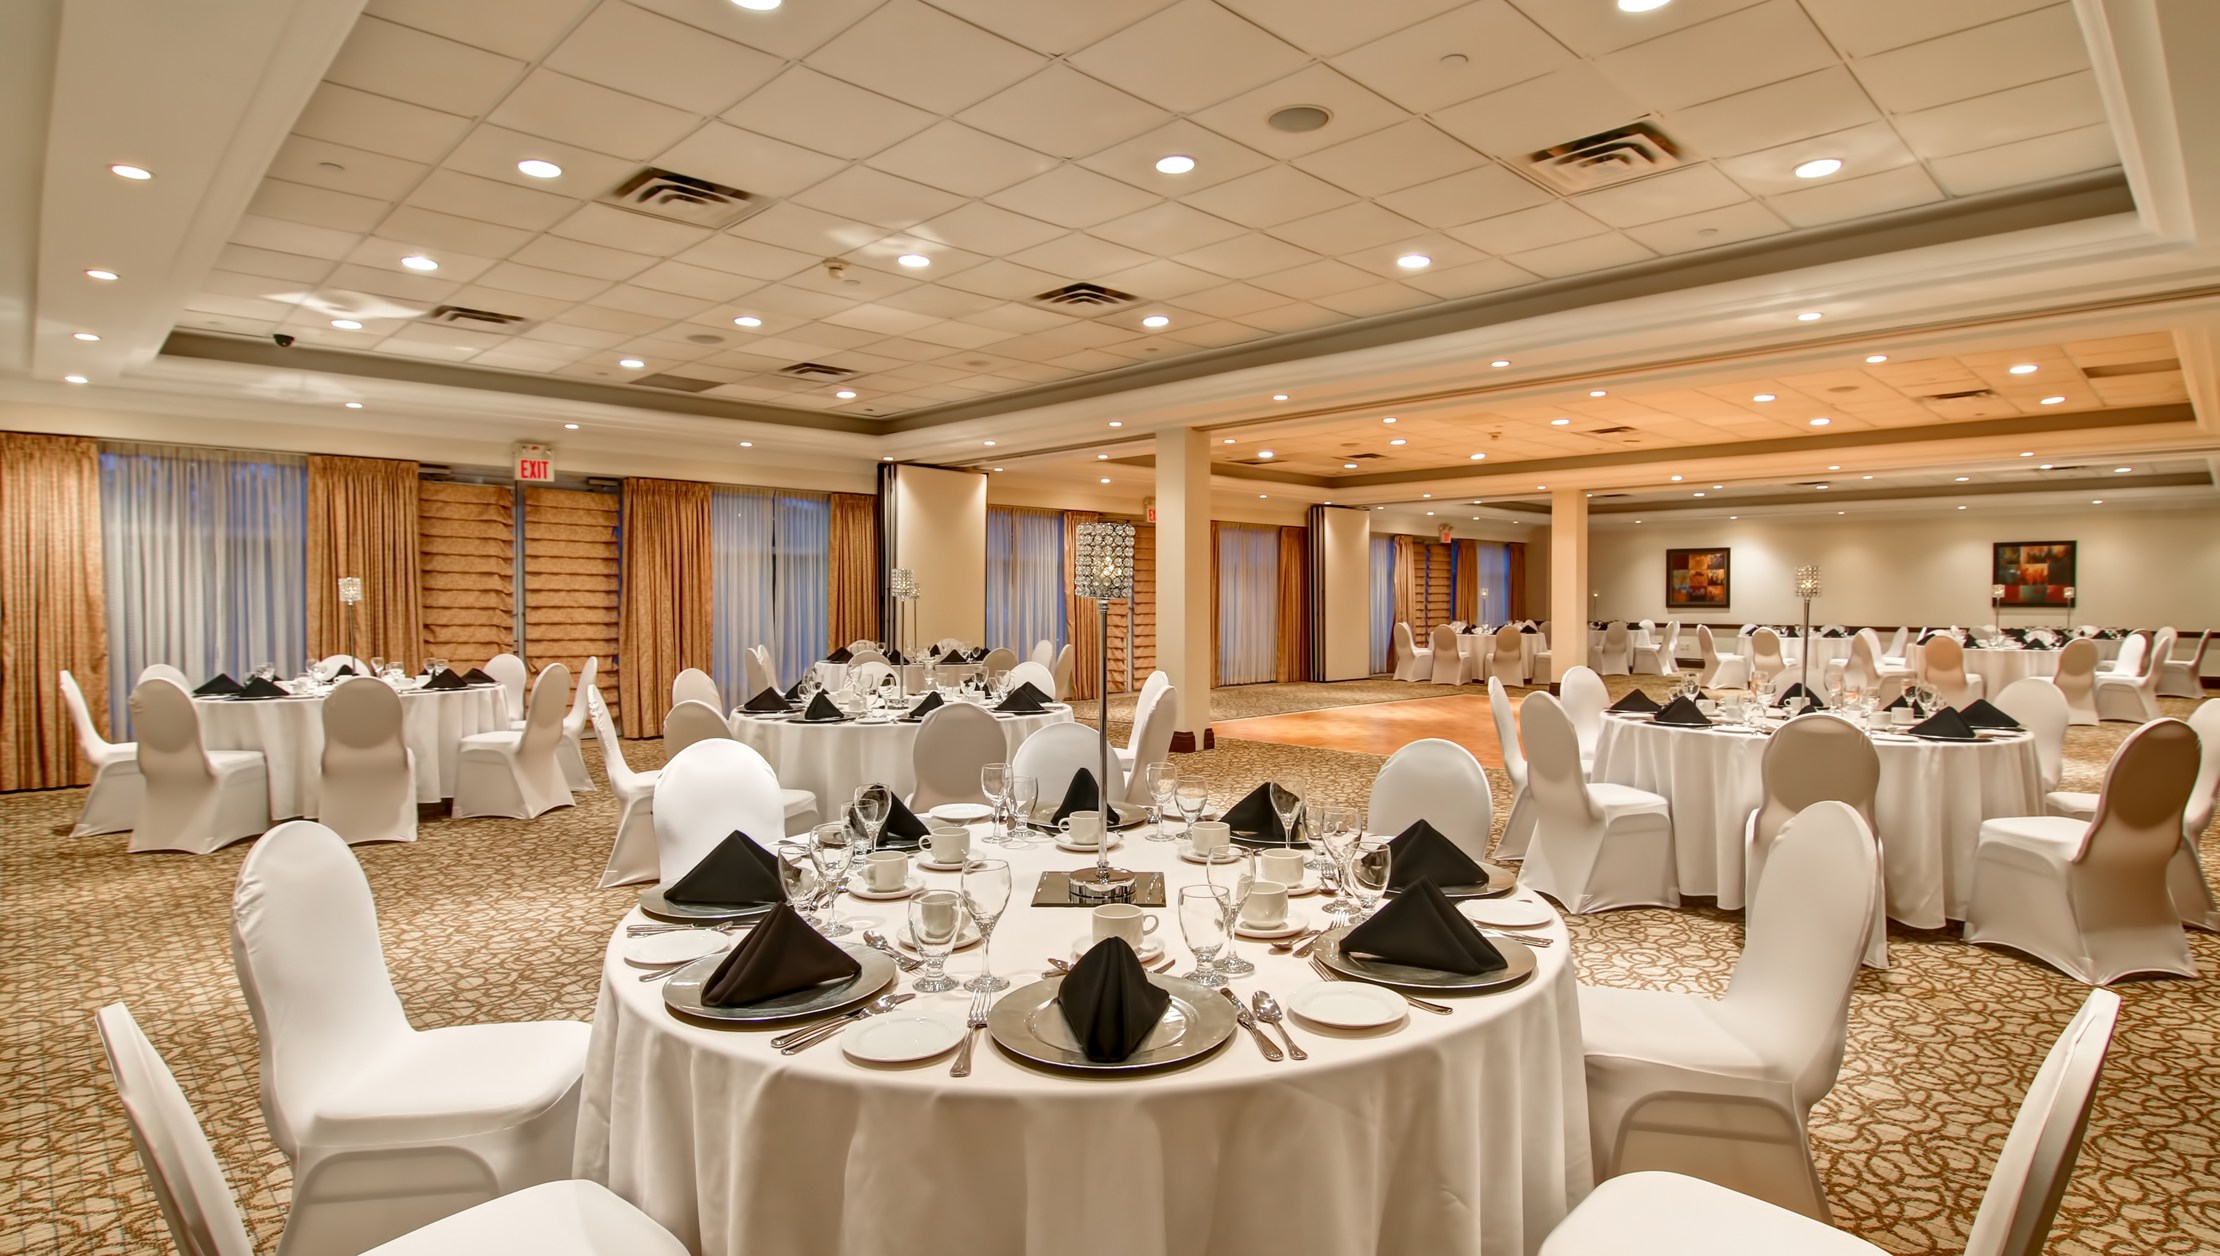 Photo of interior banquet hall with several tables set for event